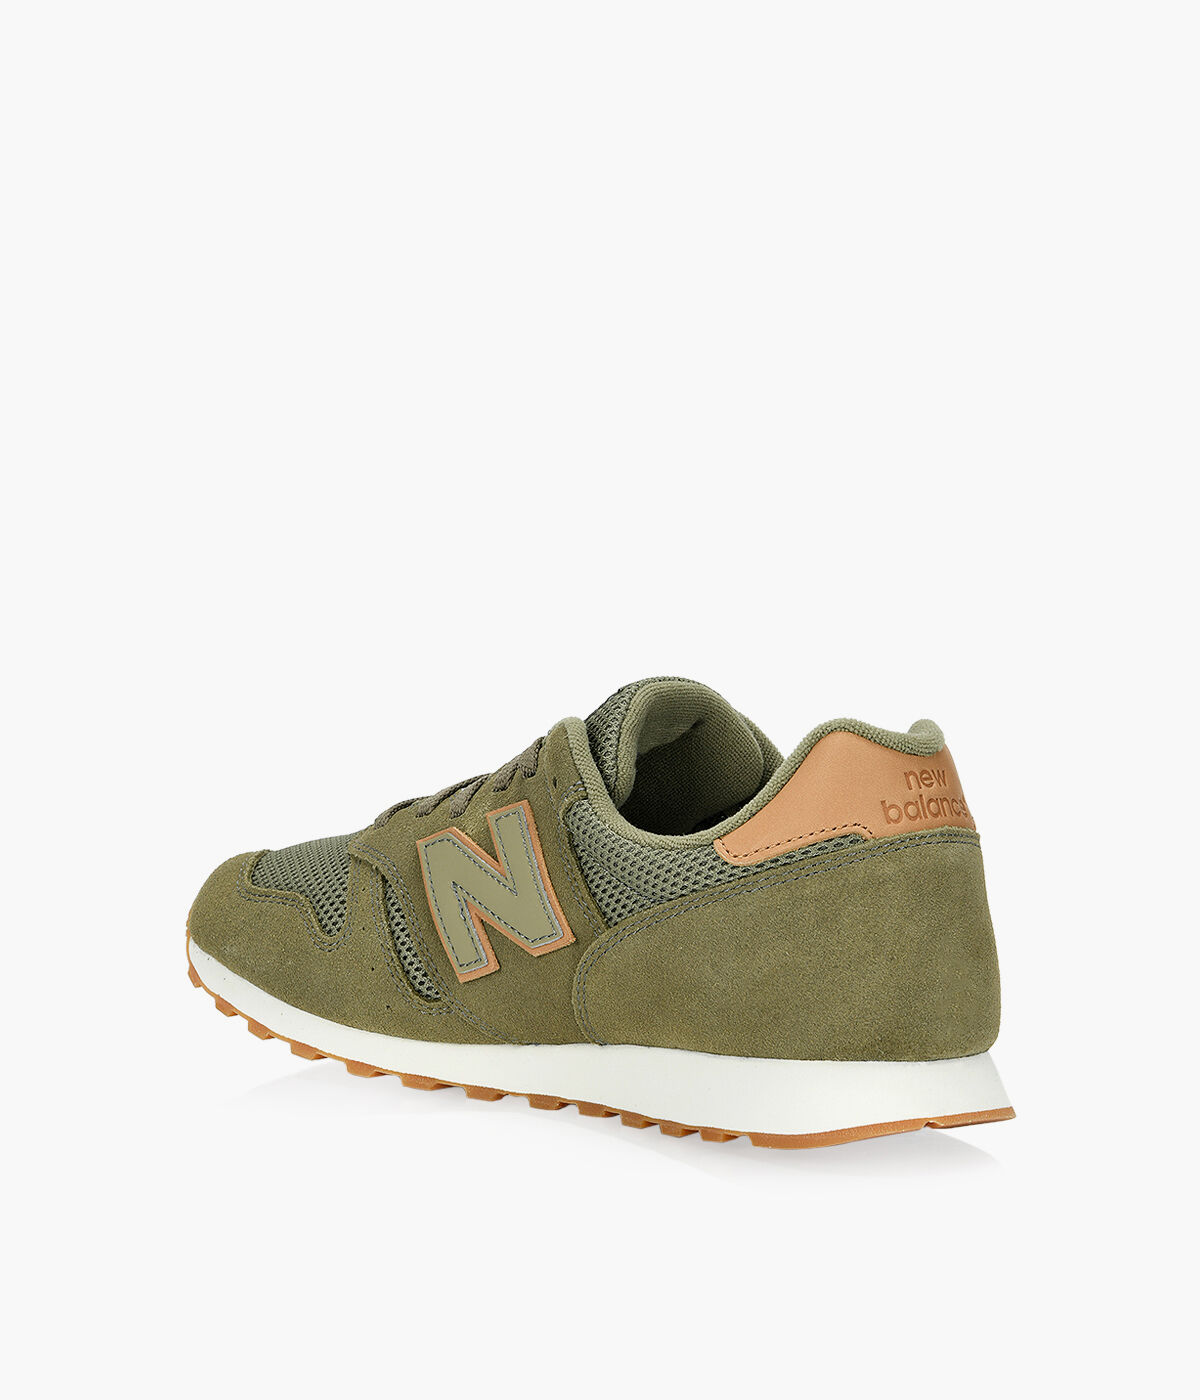 NEW BALANCE ML373 - Suede | Browns Shoes